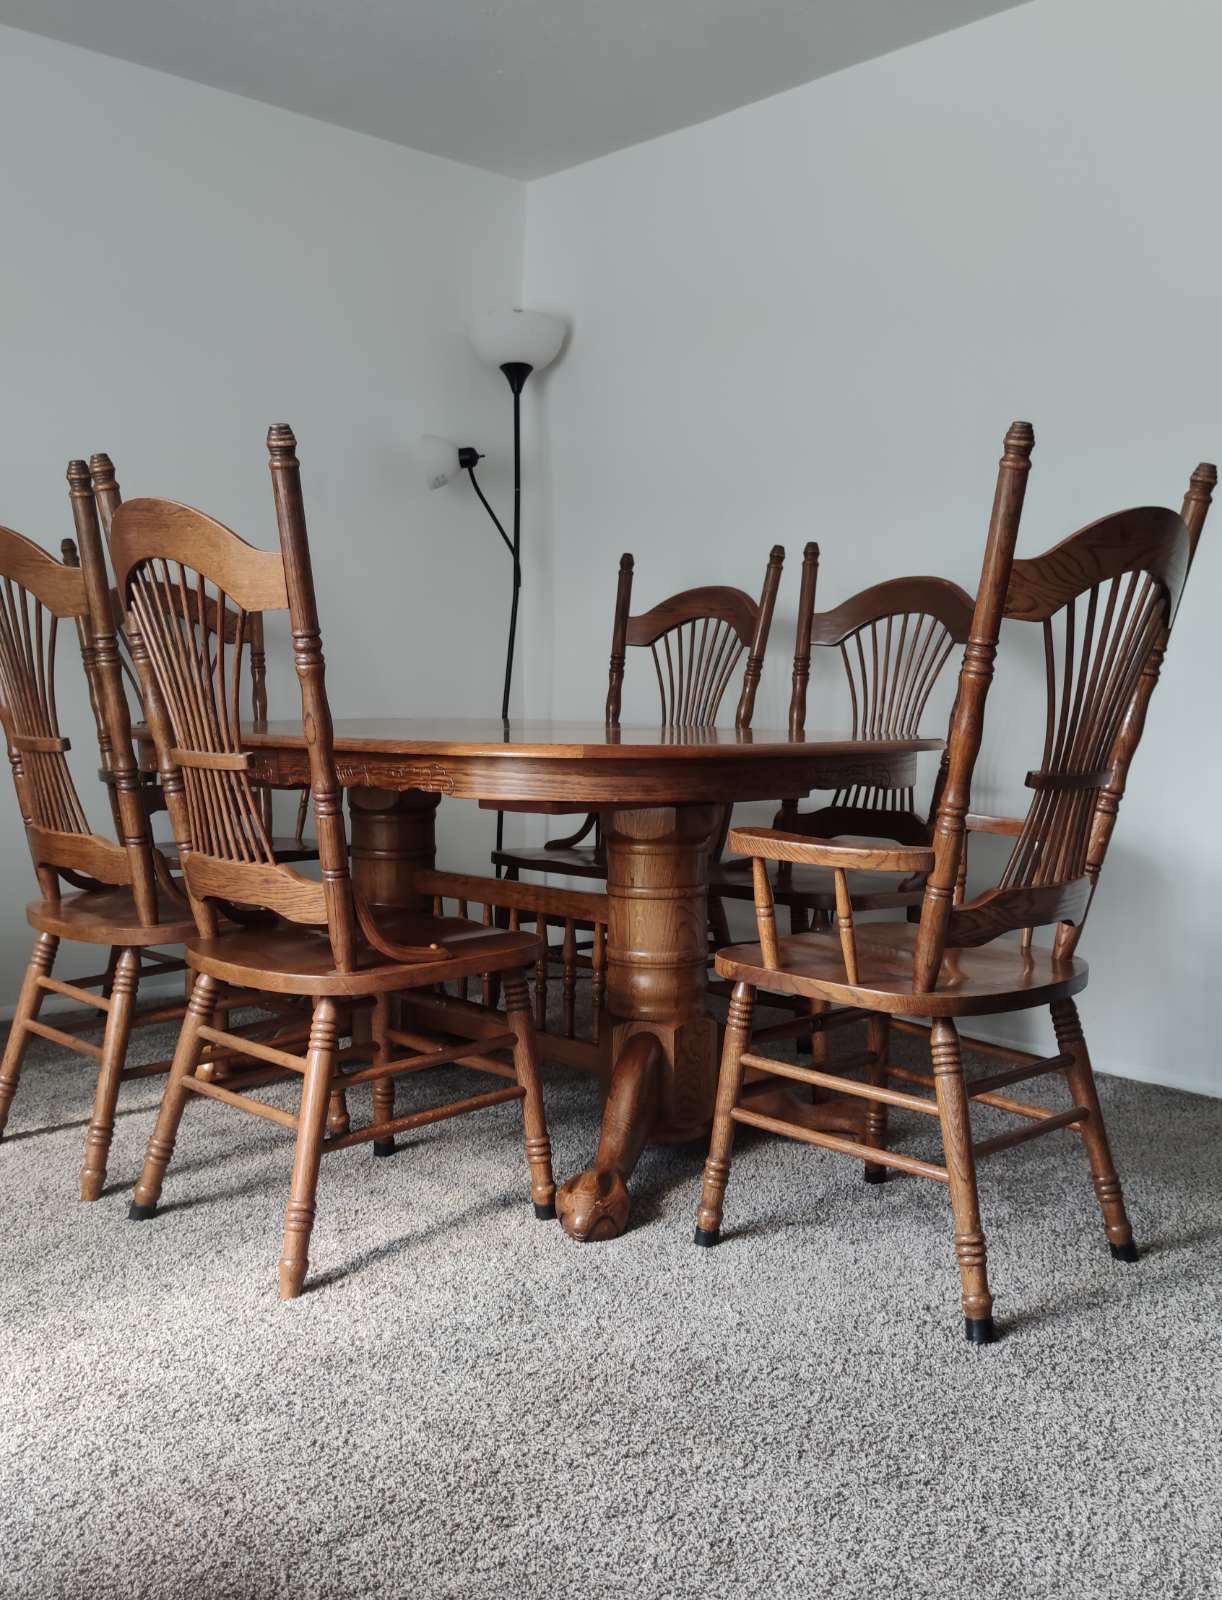 Large dining table with 4 chairs